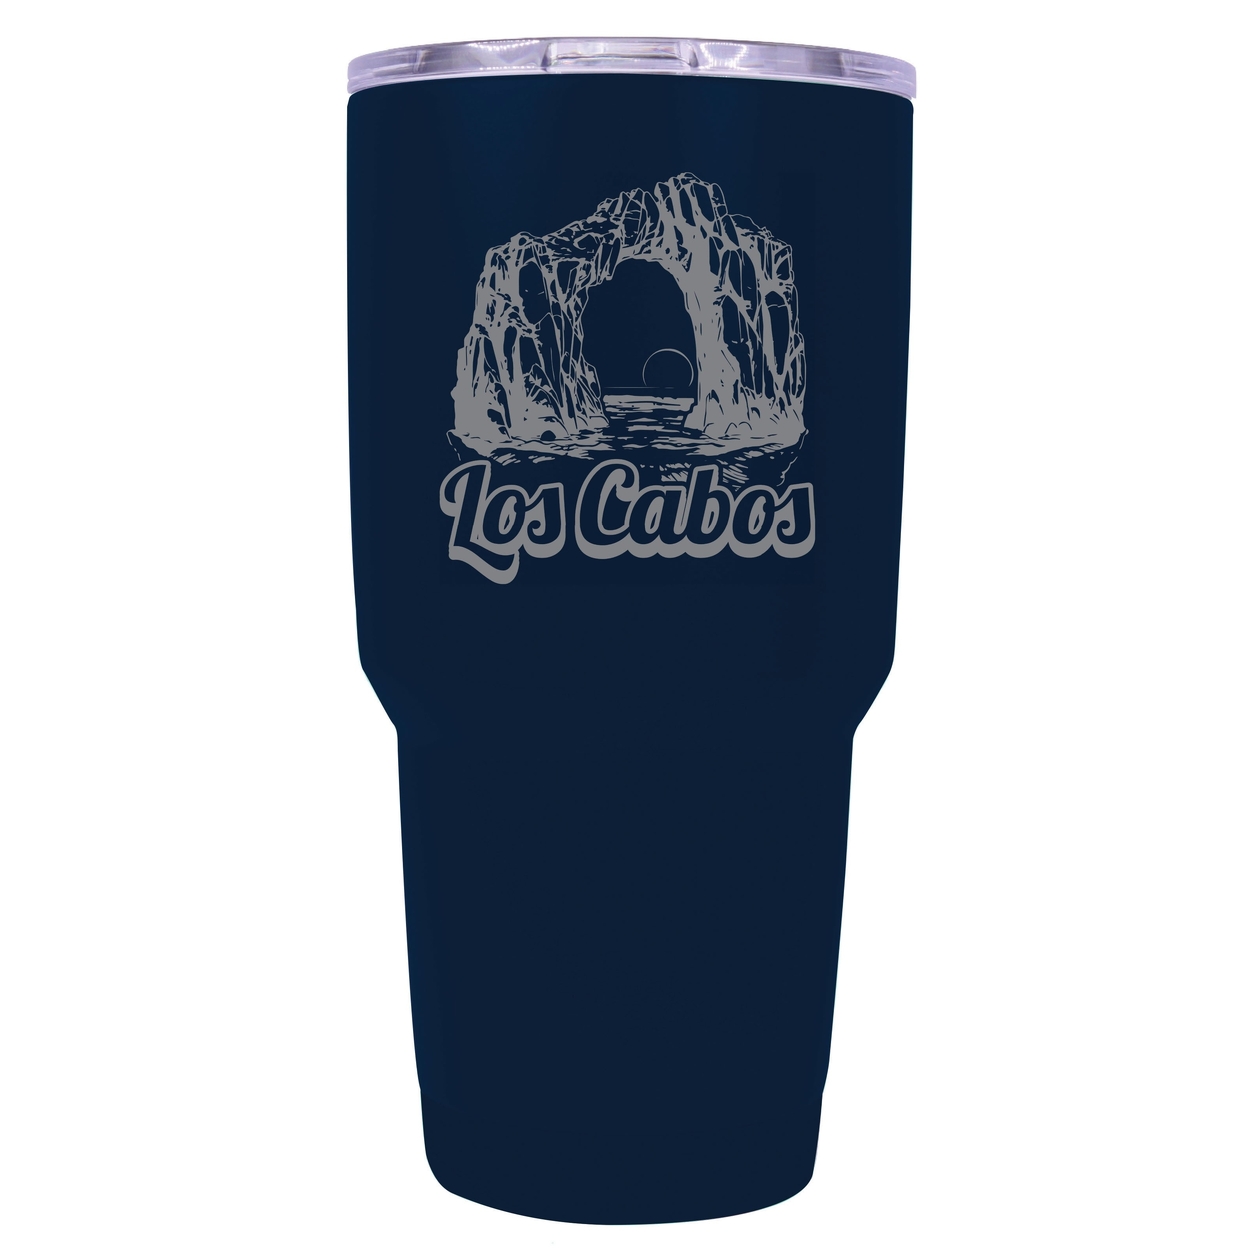 Los Cabos Mexico Souvenir 24 Oz Engraved Insulated Stainless Steel Tumbler - Navy,,4-Pack